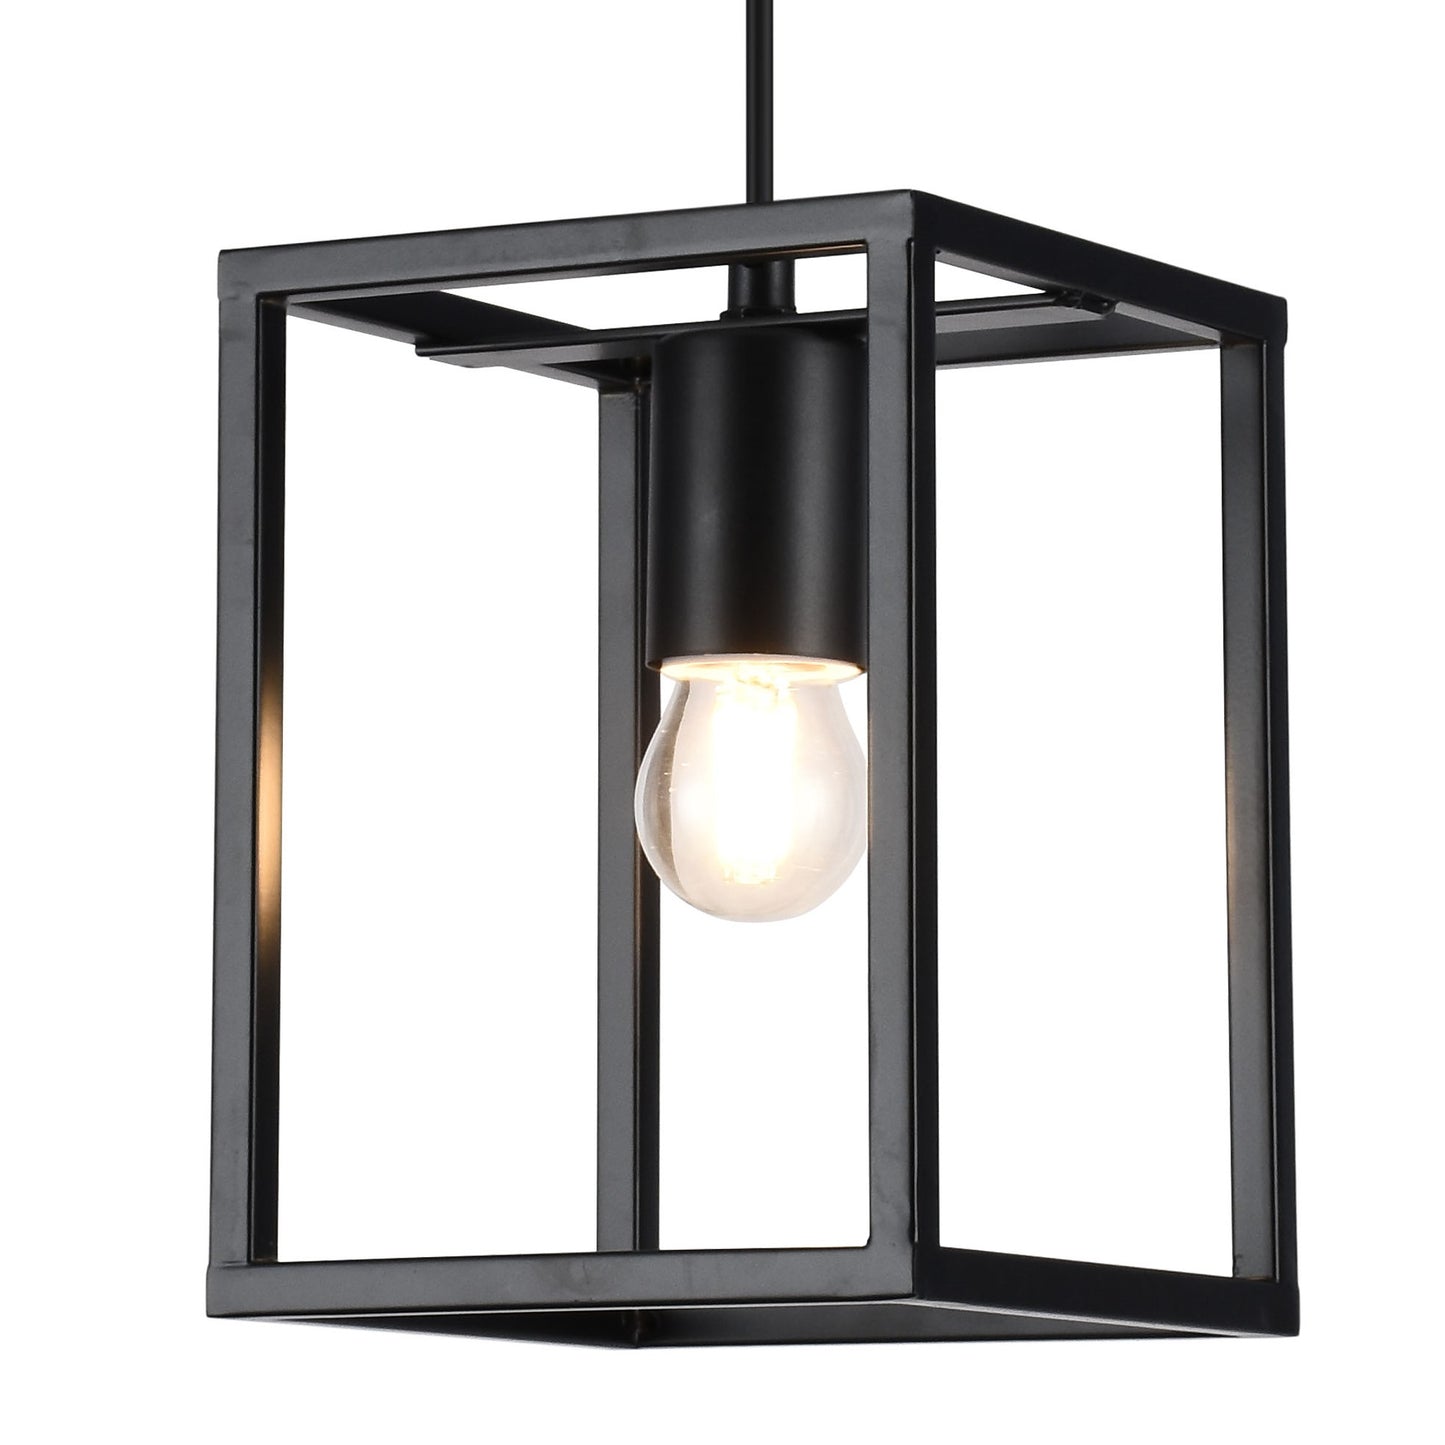 Our Molly pendant light is a stylish addition suitable for every room, its metal black square cage shape creates a beautiful feature on any ceiling. The lamp looks great with a filament light bulb, especially in industrial and modern interiors.